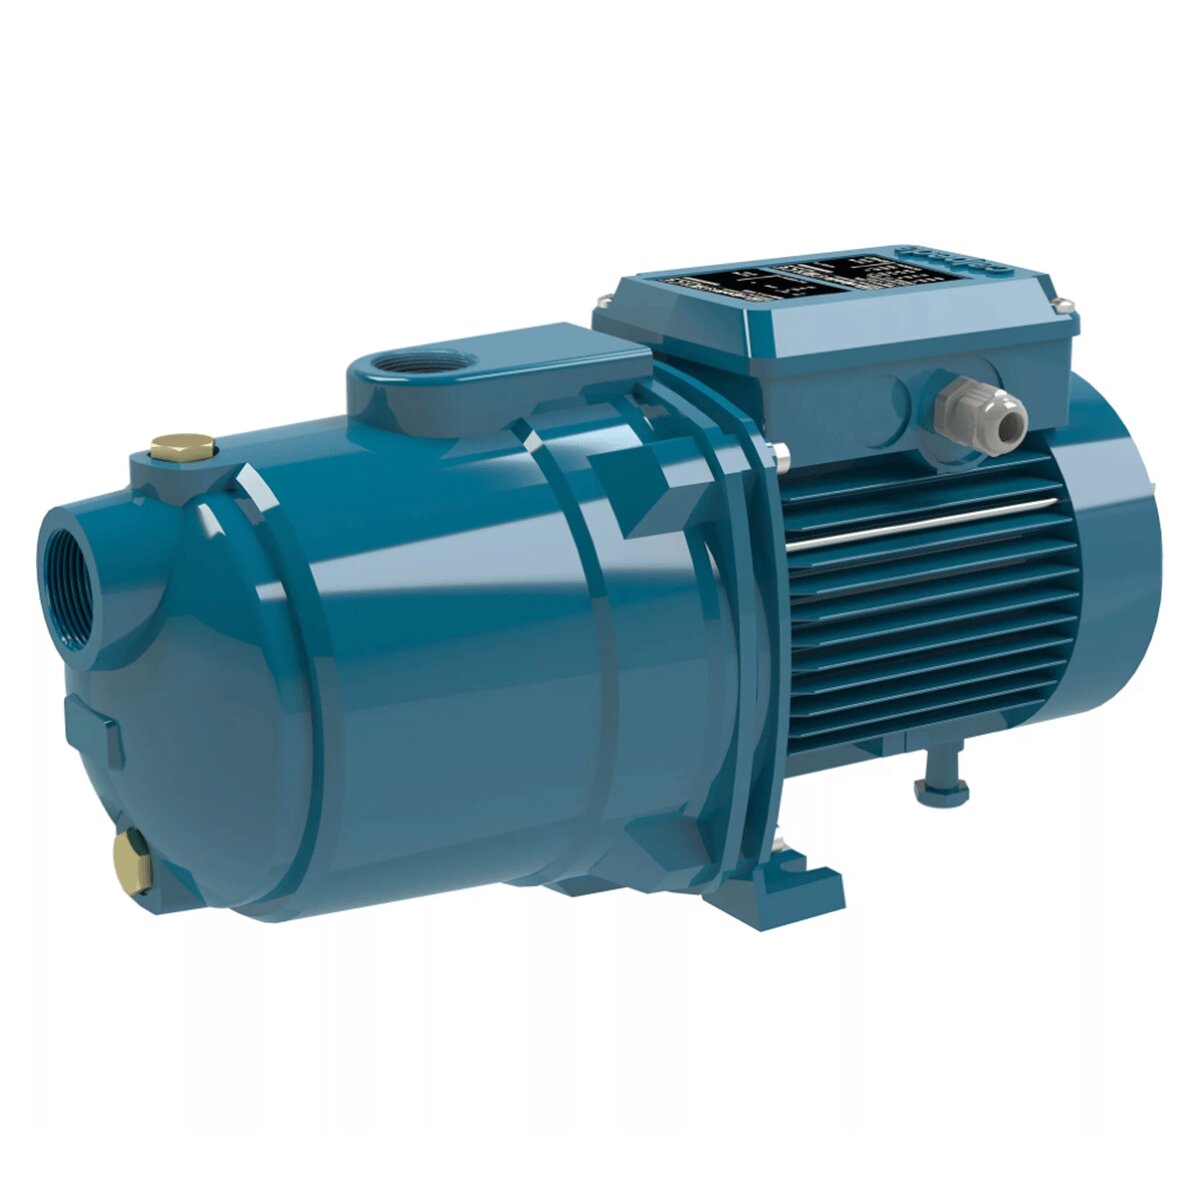 Calpeda NGLM 4/110 self-priming pump with ejector 1 HP/0.75 kW